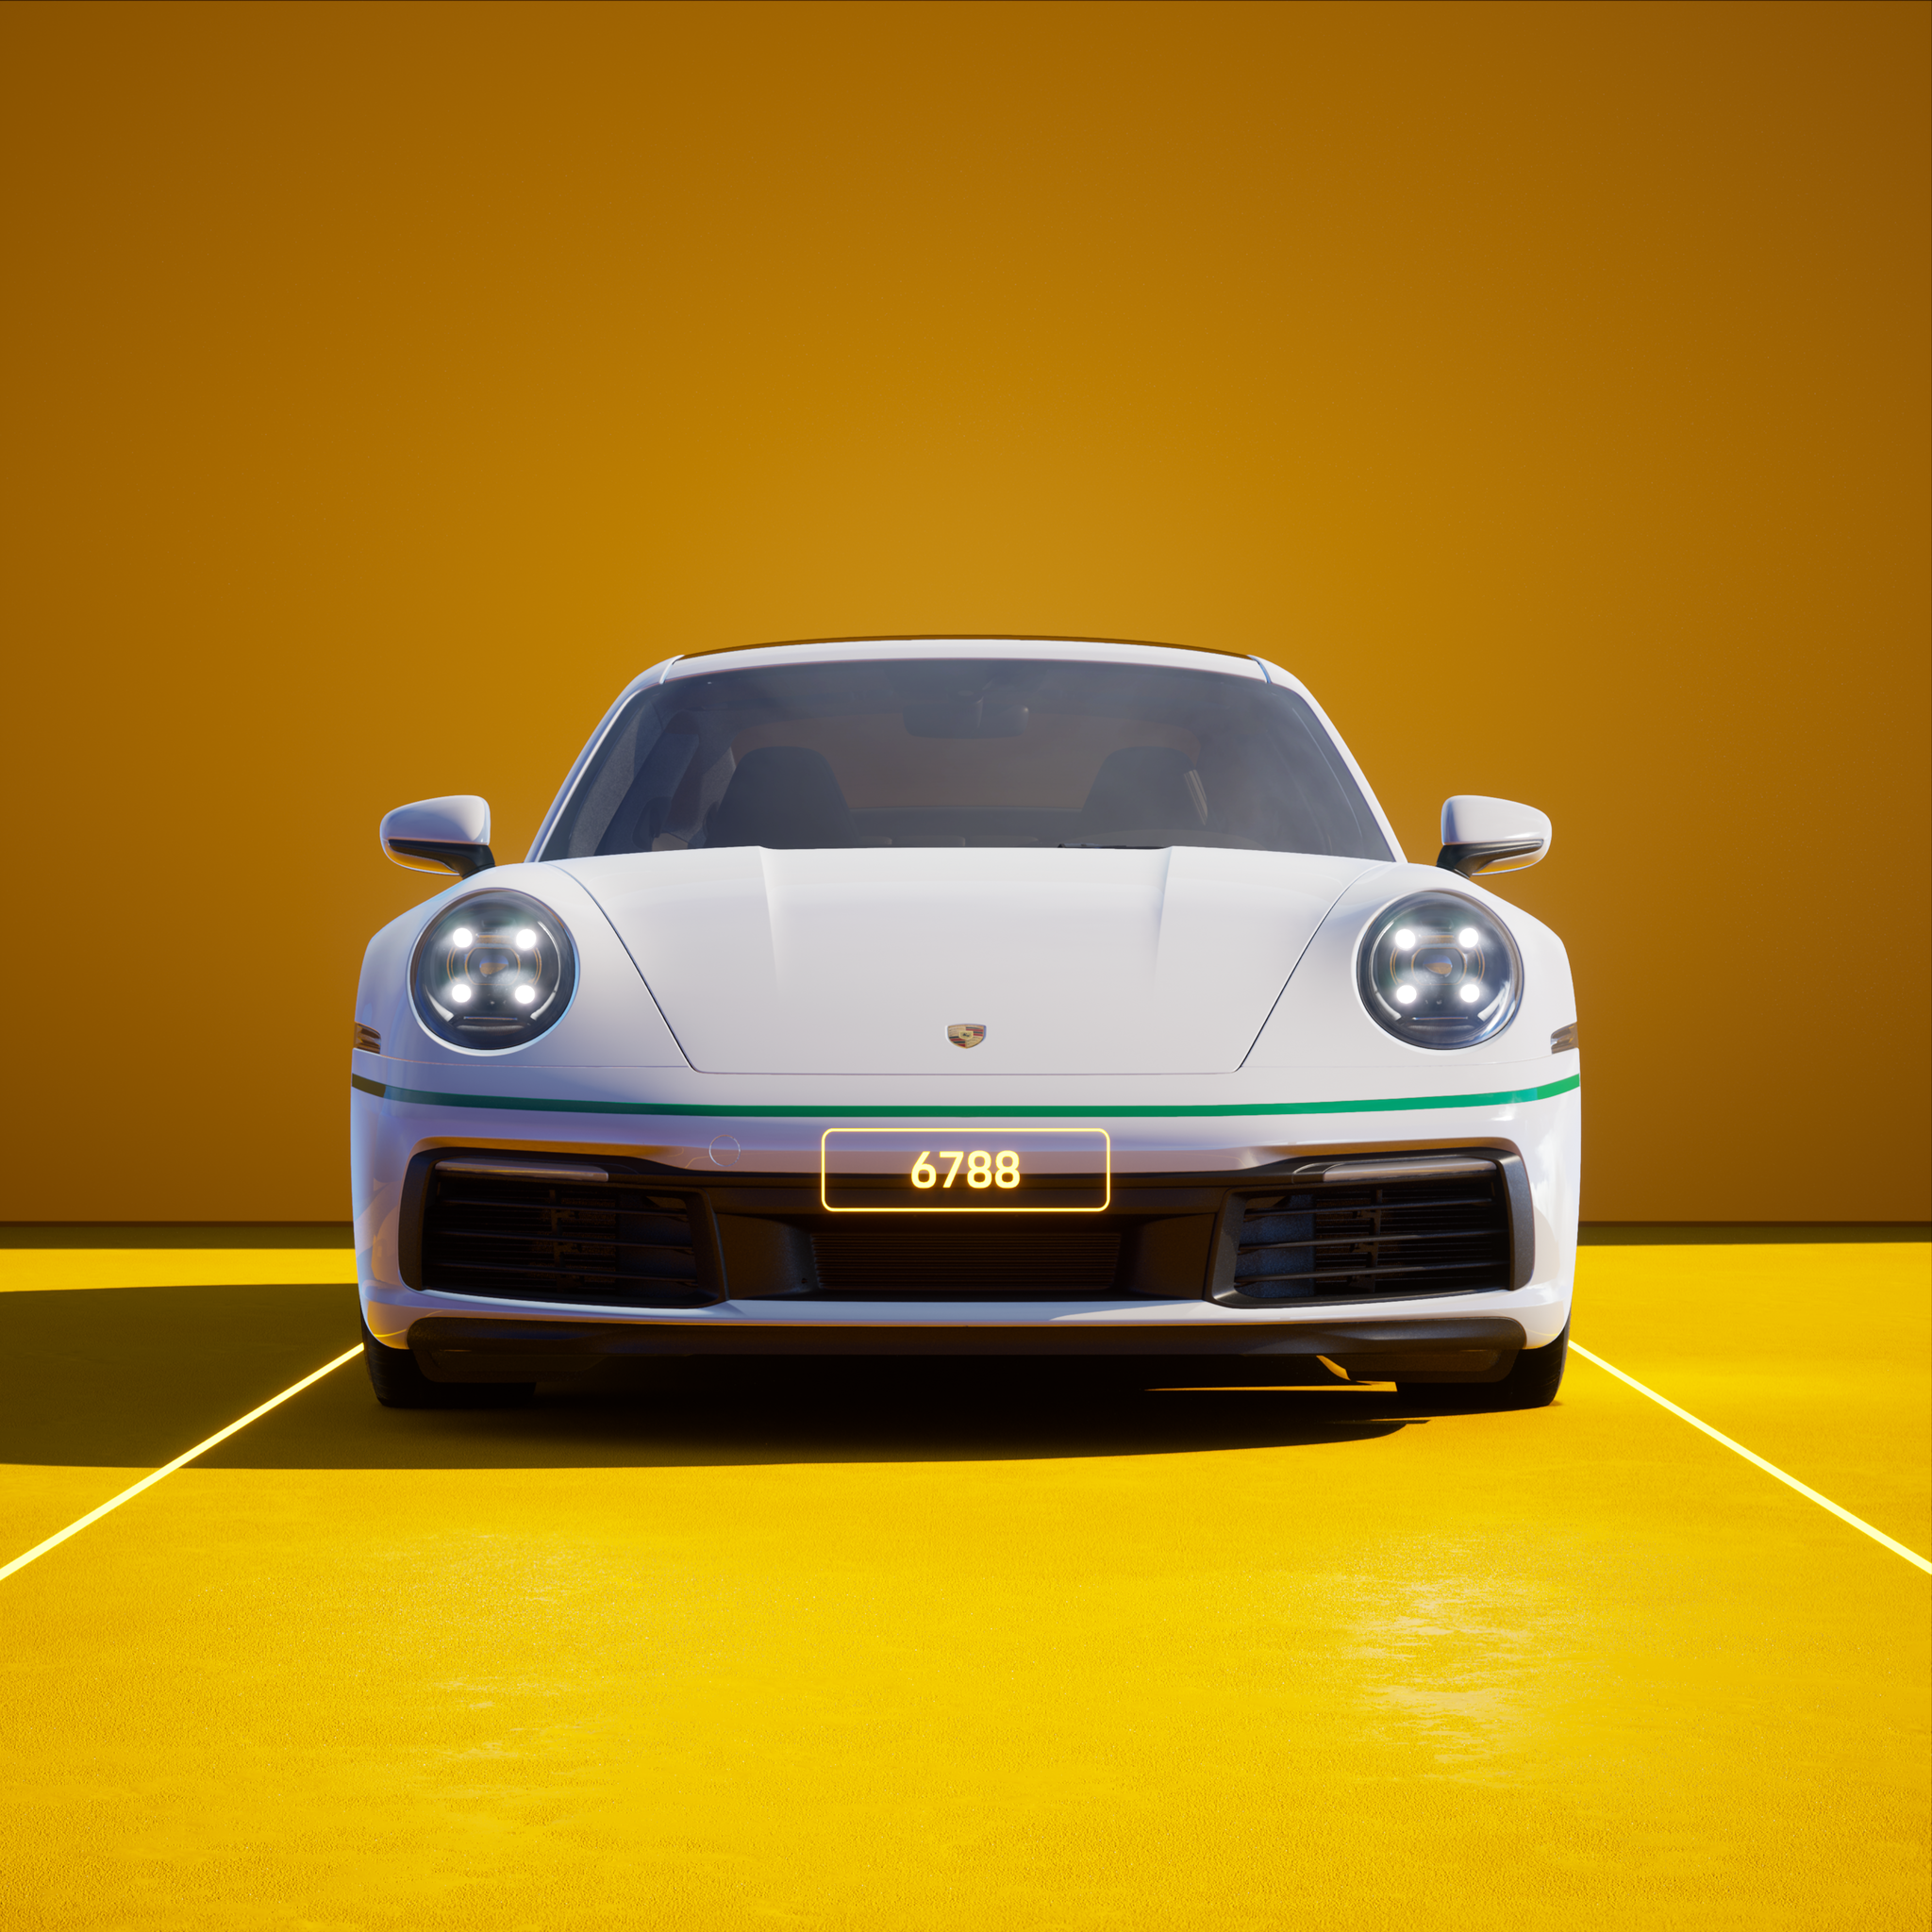 The PORSCHΞ 911 6788 image in phase